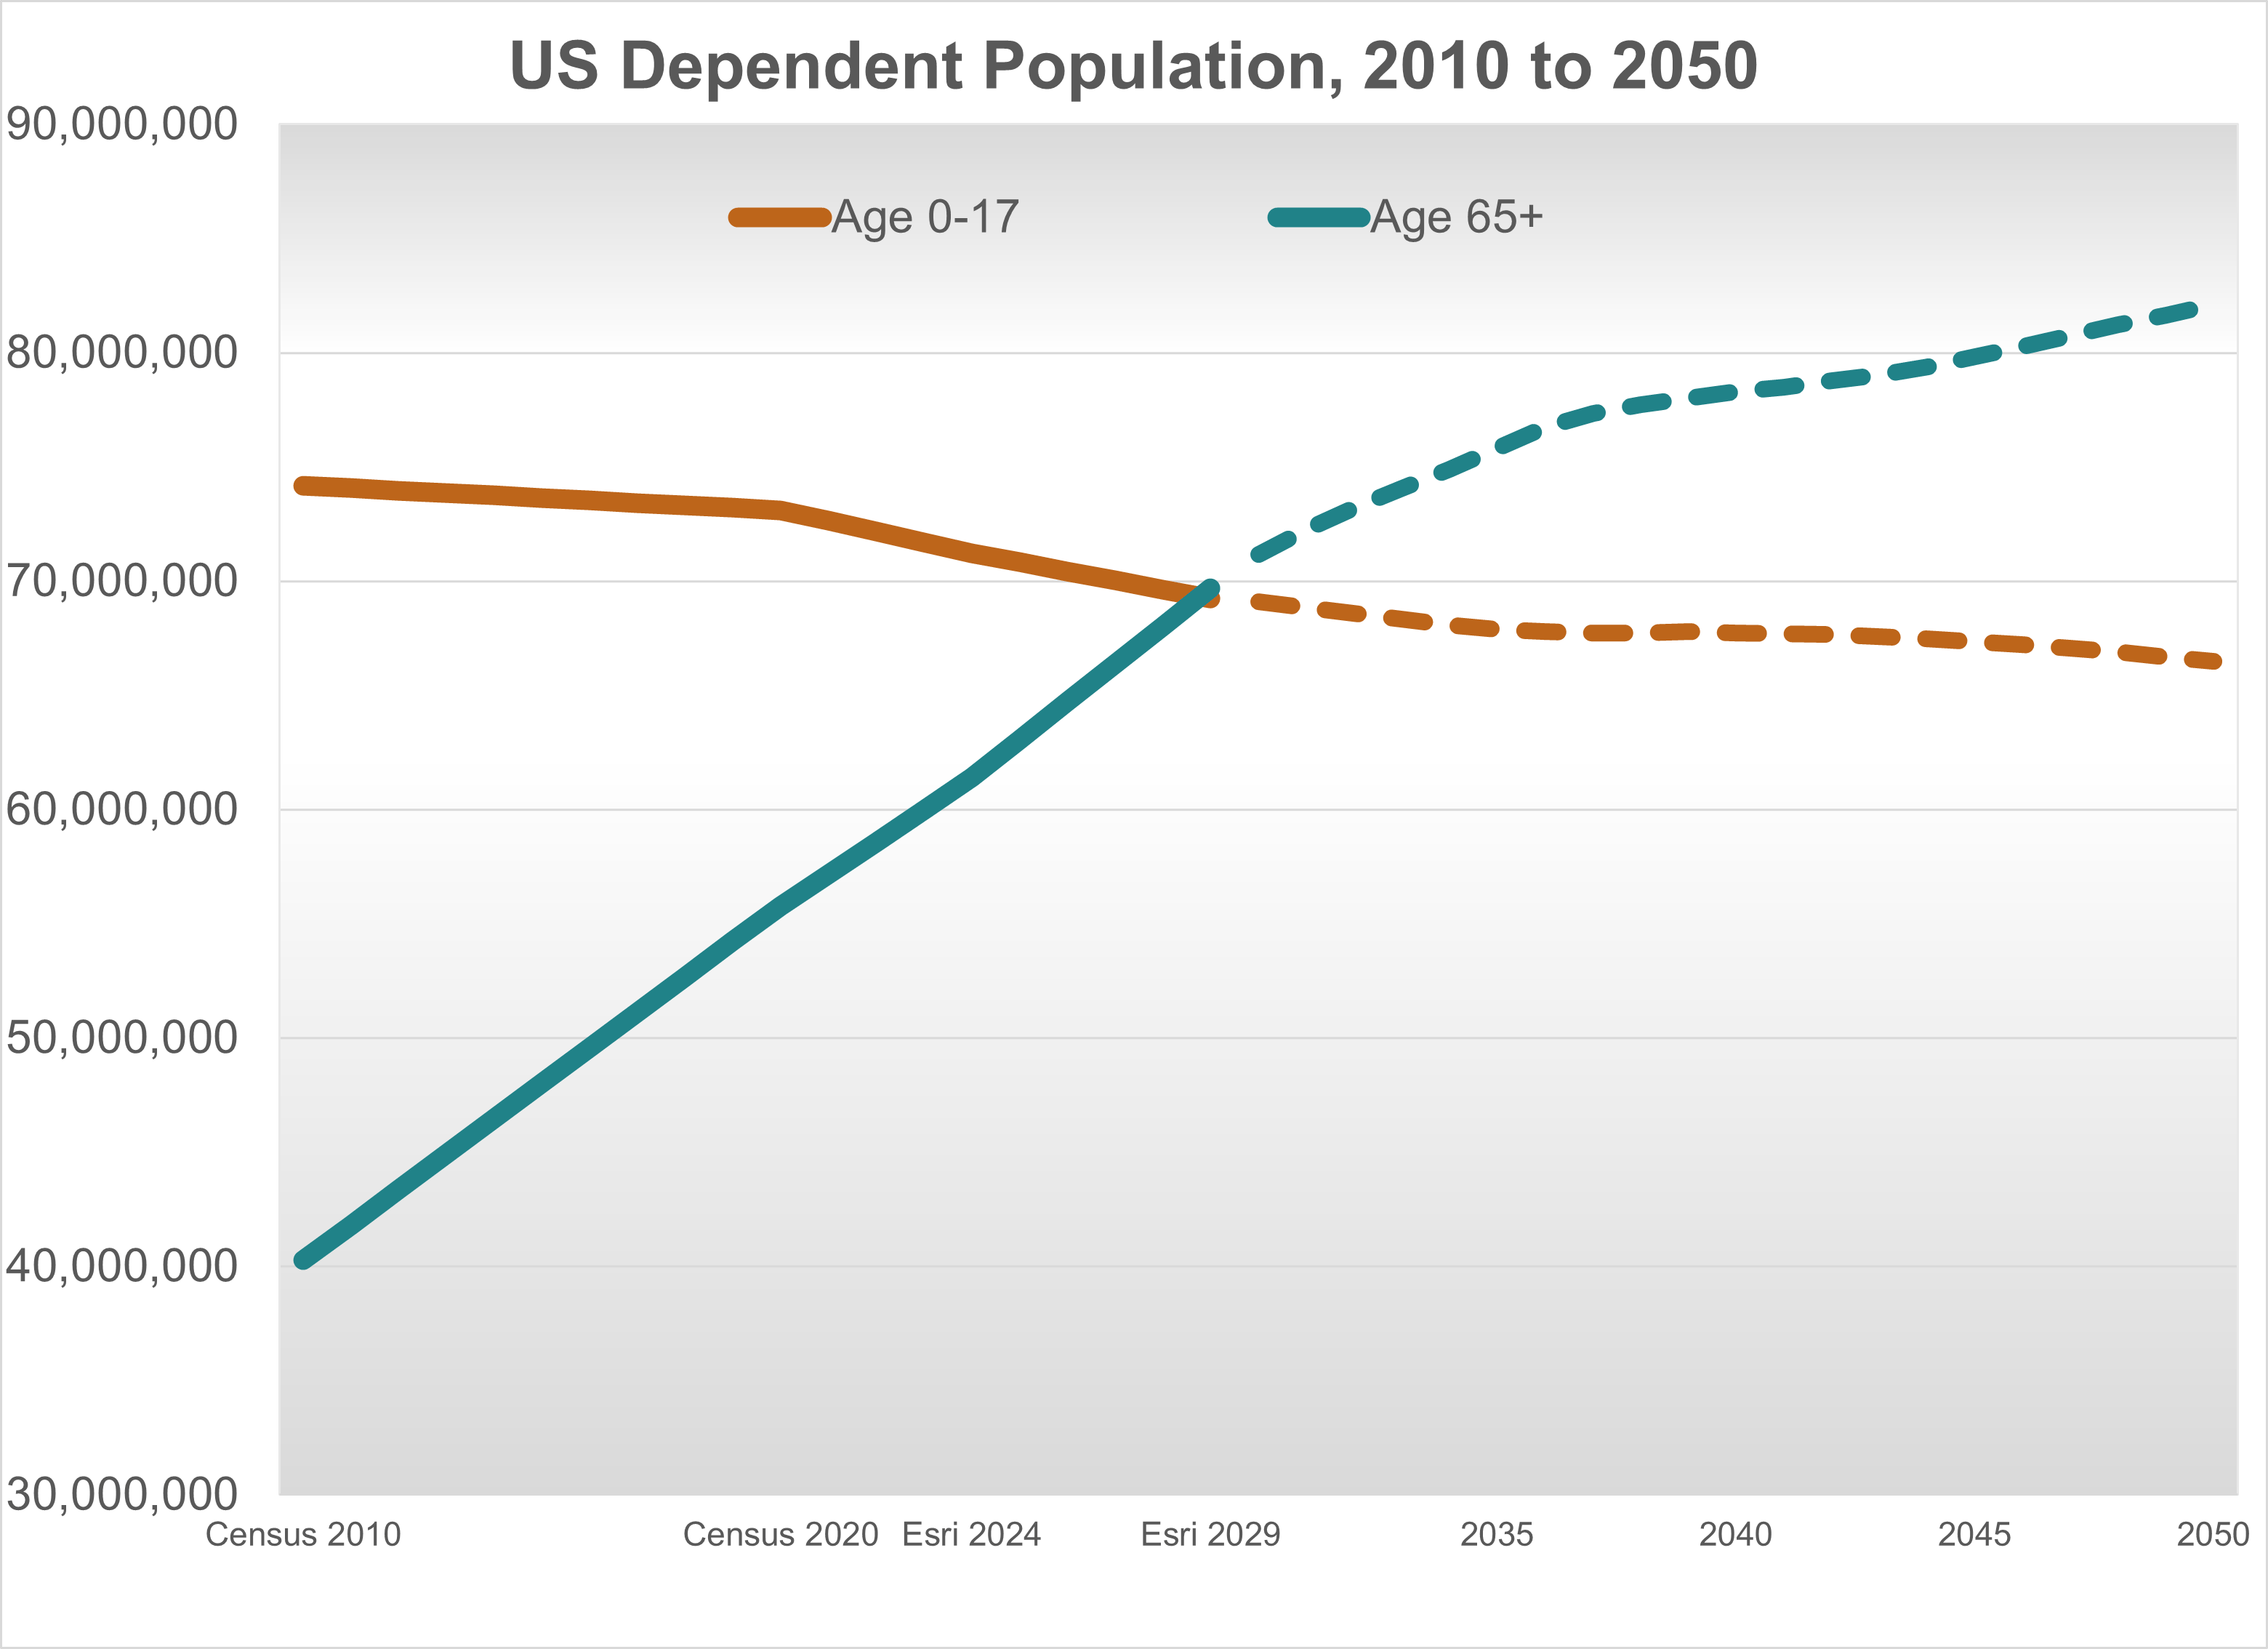 Dependent Population, 2010 to 205 for the U.S.